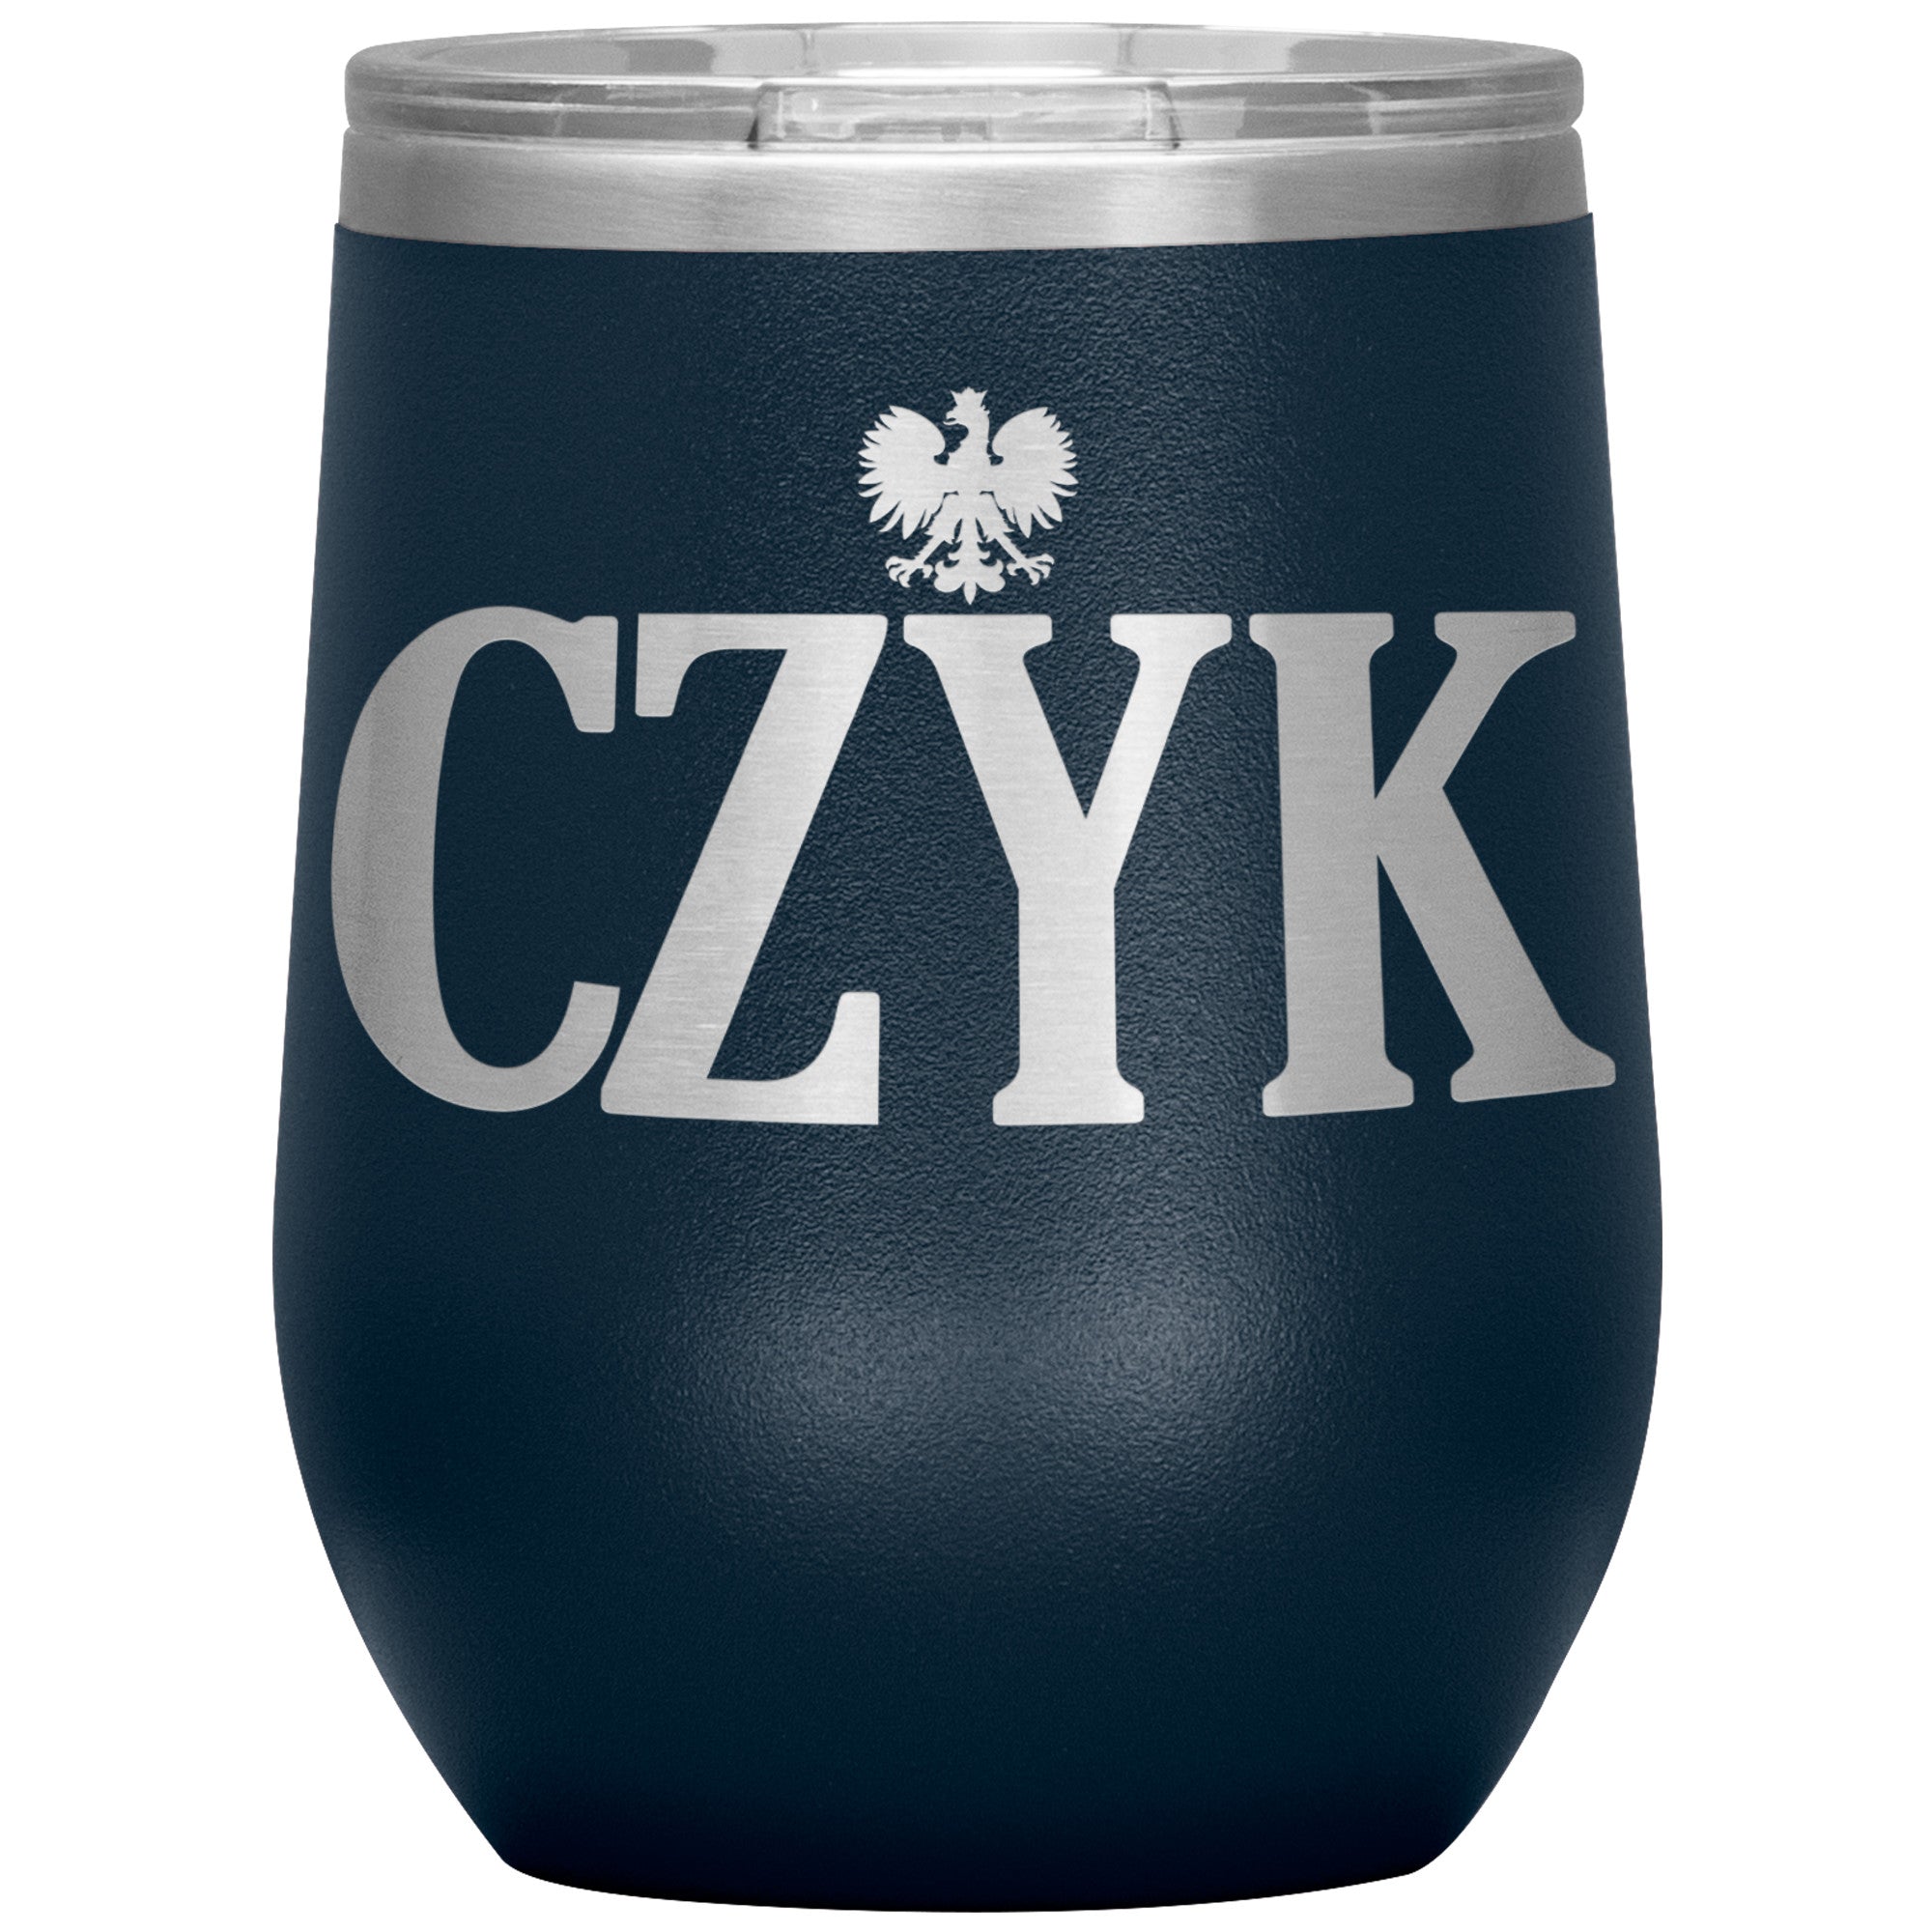 Polish Surnames Ending In CZYK Insulated Wine Tumbler Tumblers teelaunch Navy  